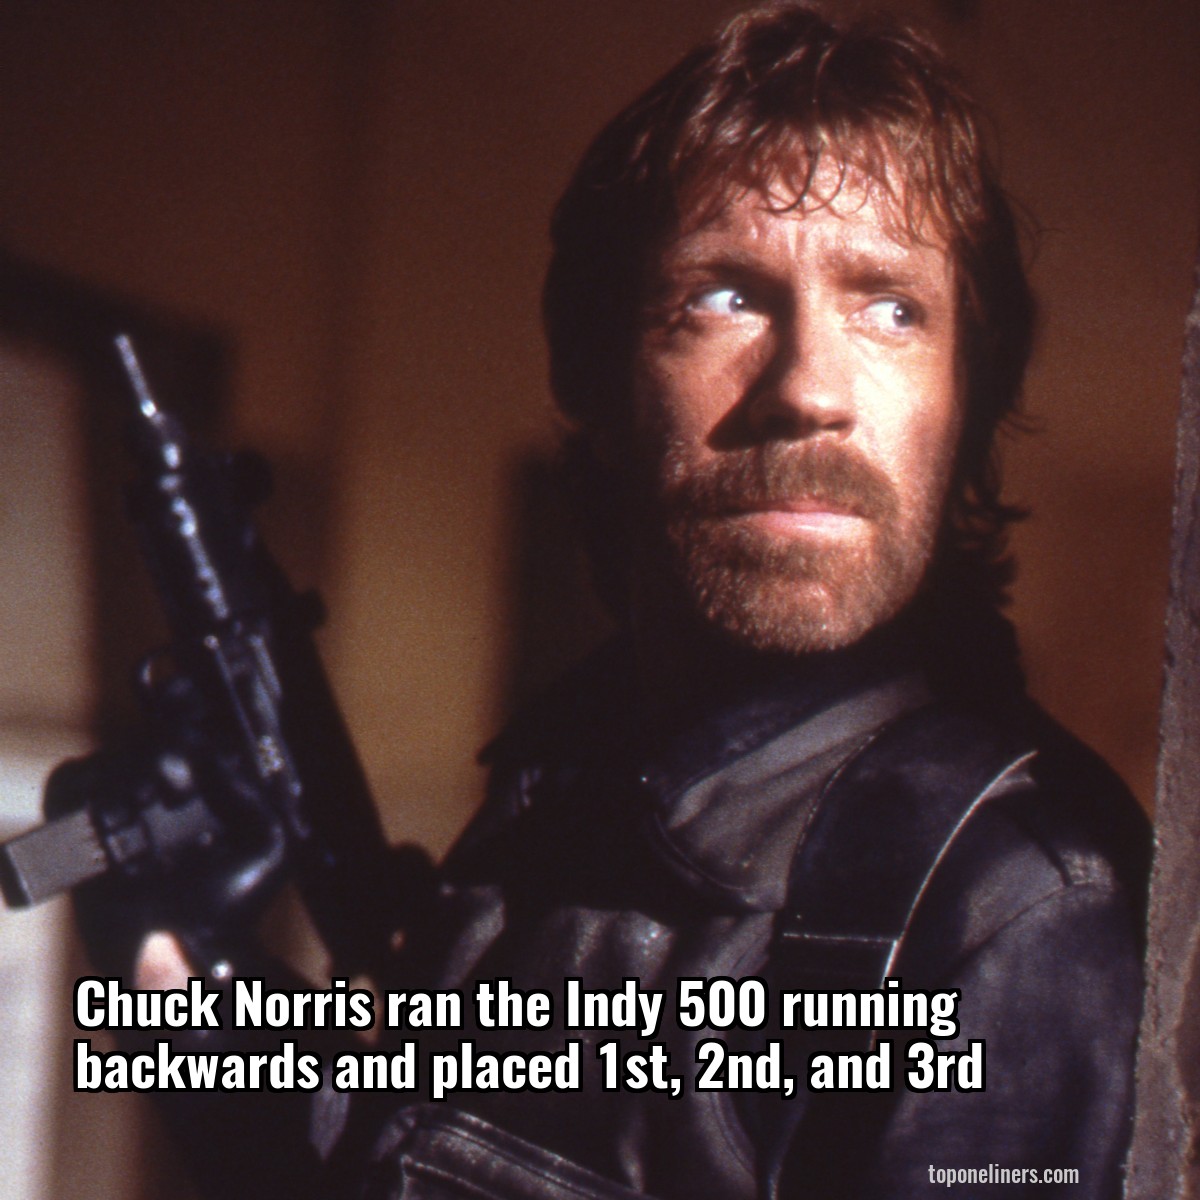 Chuck Norris ran the Indy 500 running backwards and placed 1st, 2nd, and 3rd